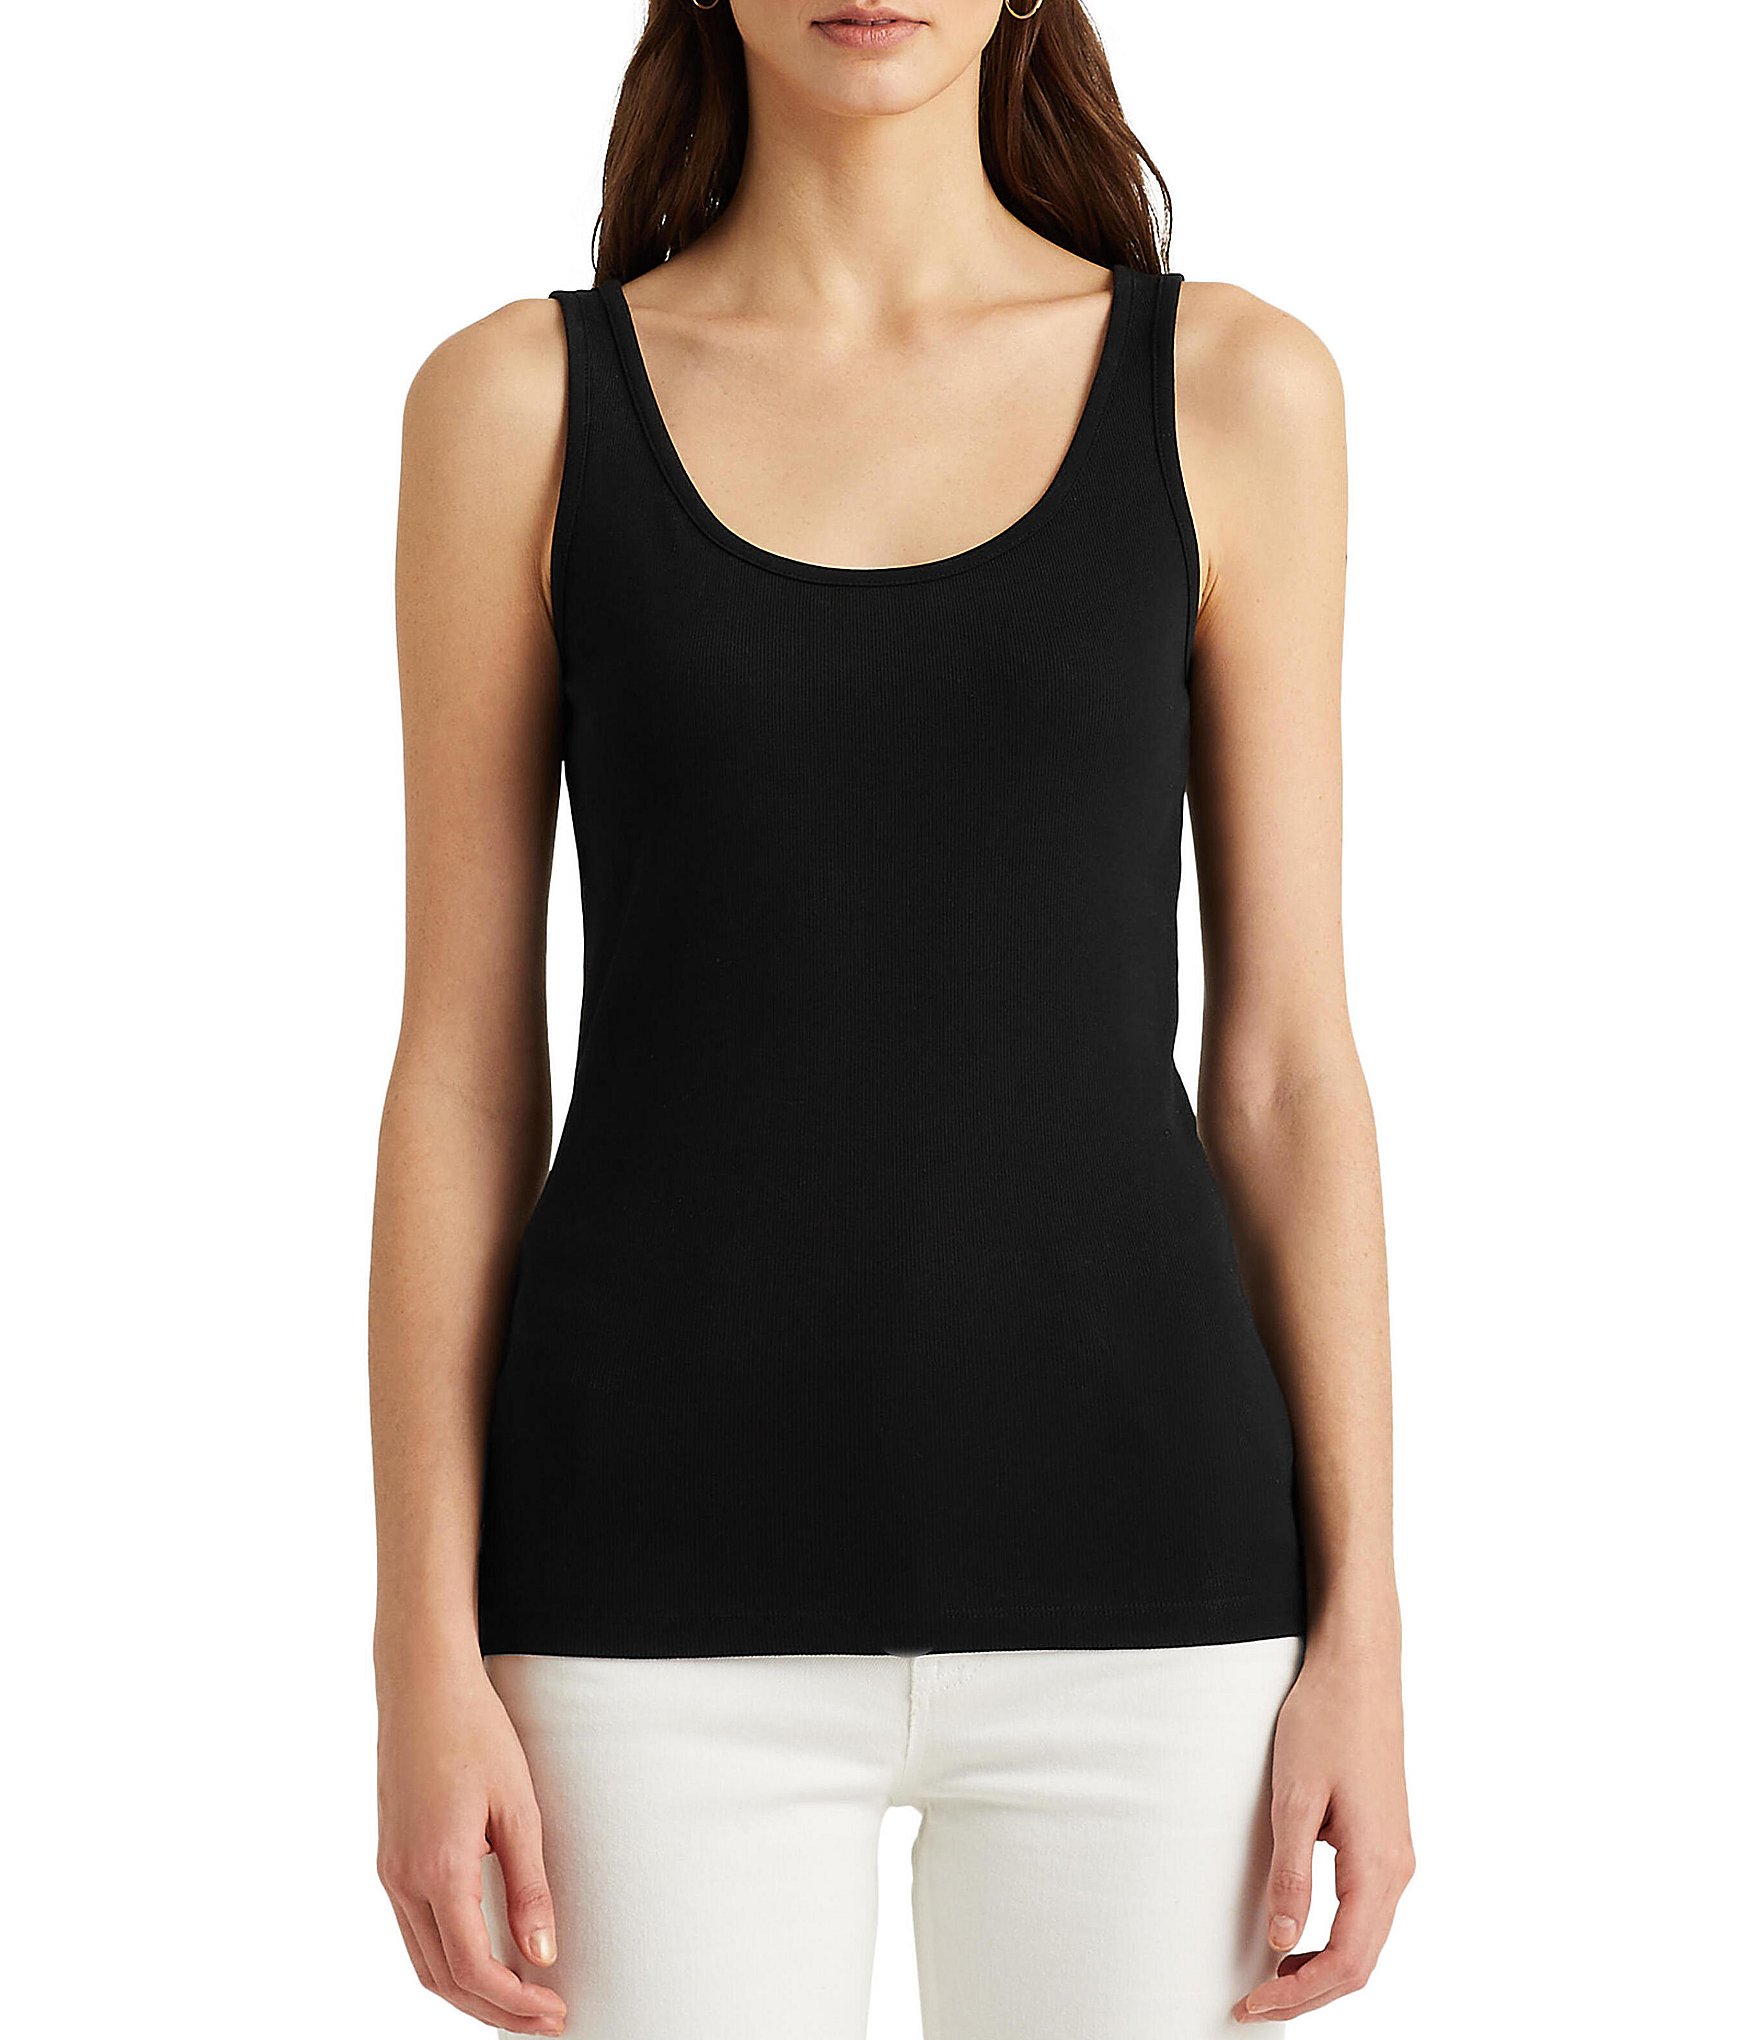 Cotton tank top in black - Vince